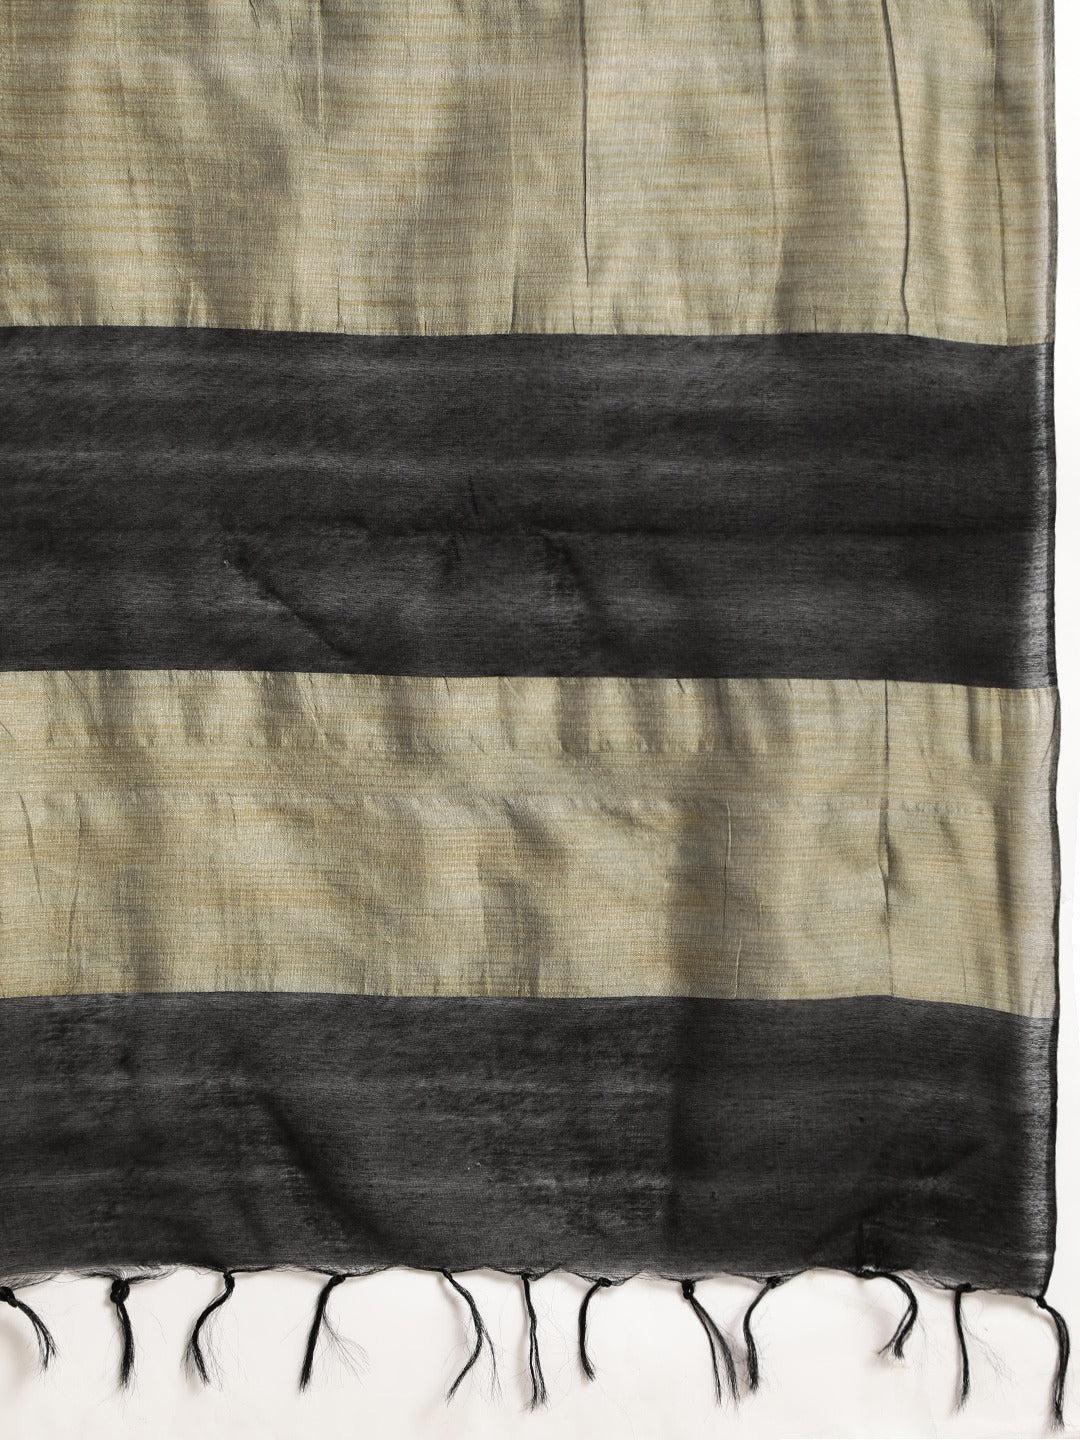 Black and Beige Striped Saree - Indian Clothing in Denver, CO, Aurora, CO, Boulder, CO, Fort Collins, CO, Colorado Springs, CO, Parker, CO, Highlands Ranch, CO, Cherry Creek, CO, Centennial, CO, and Longmont, CO. Nationwide shipping USA - India Fashion X